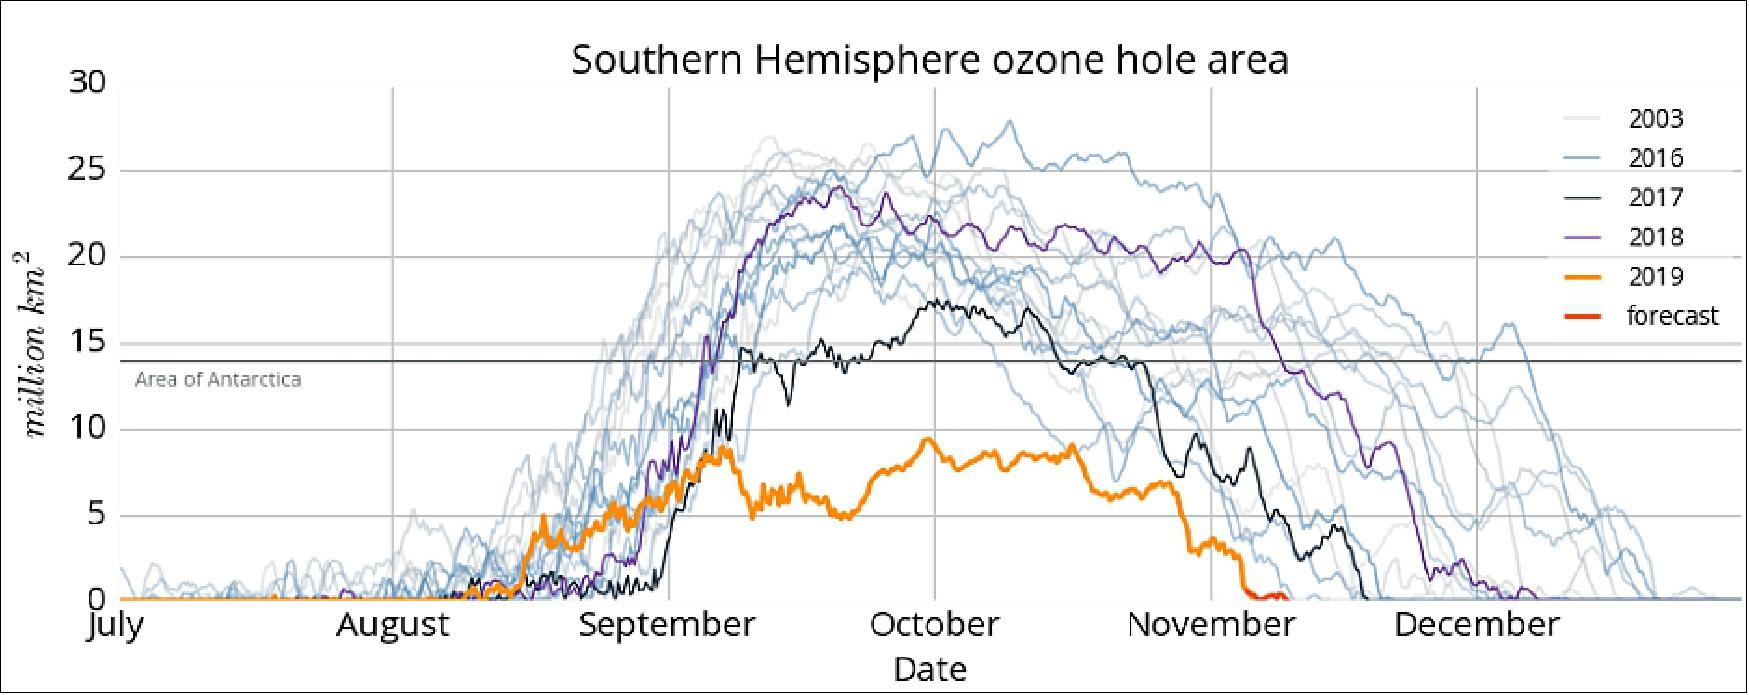 Figure 5: The yearly ozone hole duration/extension from the year 2003 to 2019. The orange line shows the opening, extension and predicted closing of the 2019 ozone hole (image credit: Copernicus/ECMWF)